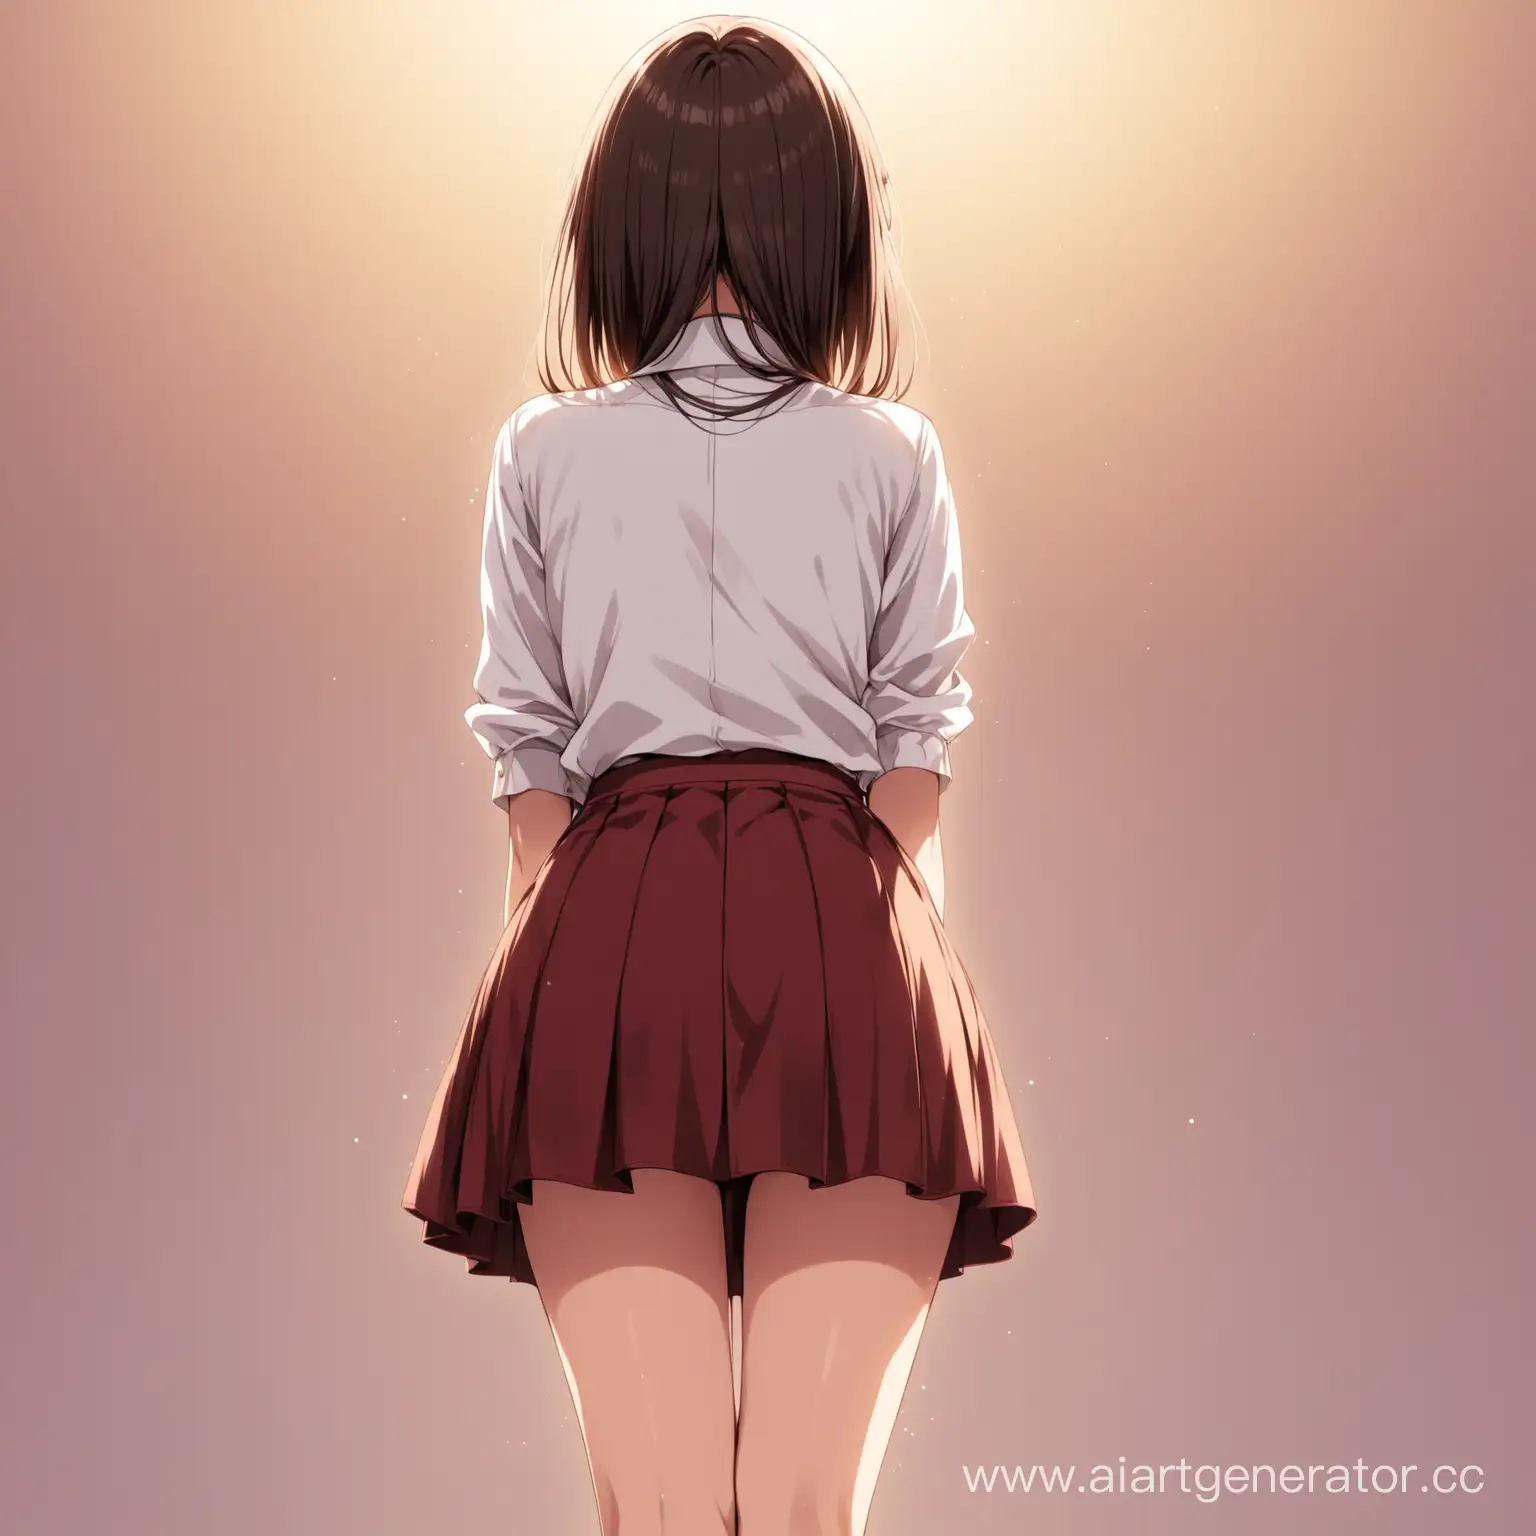 Anime-Girl-with-Flowing-Skirt-Seen-from-Behind